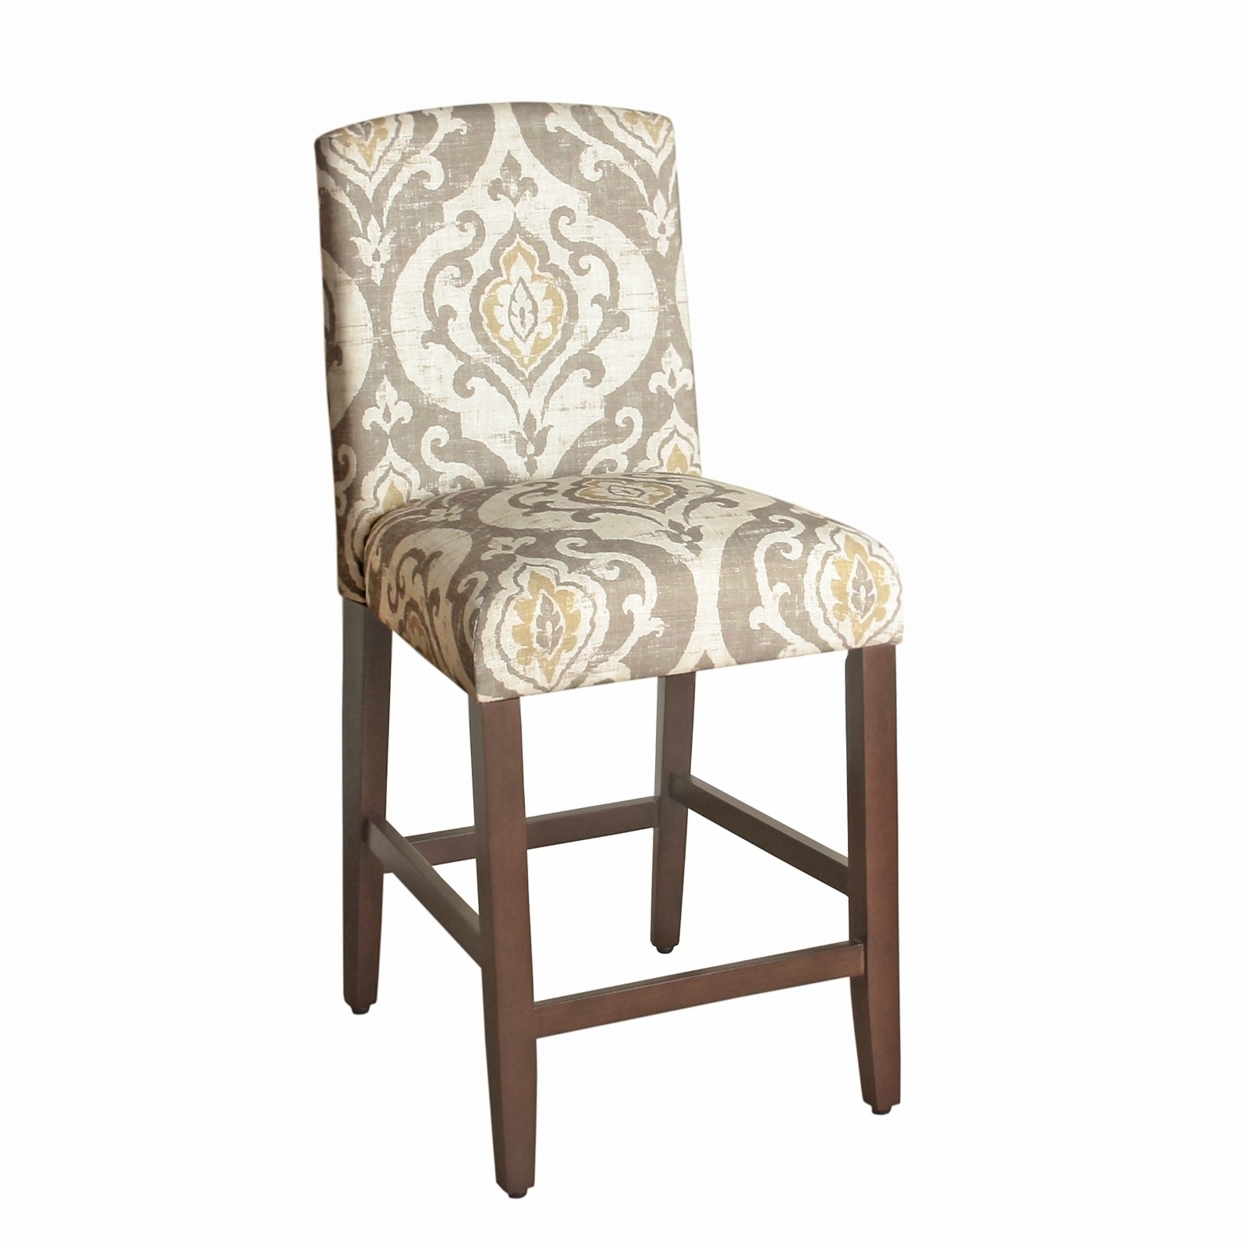 Fabric Upholstered Wooden Barstool With Medallion Pattern Cushioned Seat, Multicolor- Saltoro Sherpi